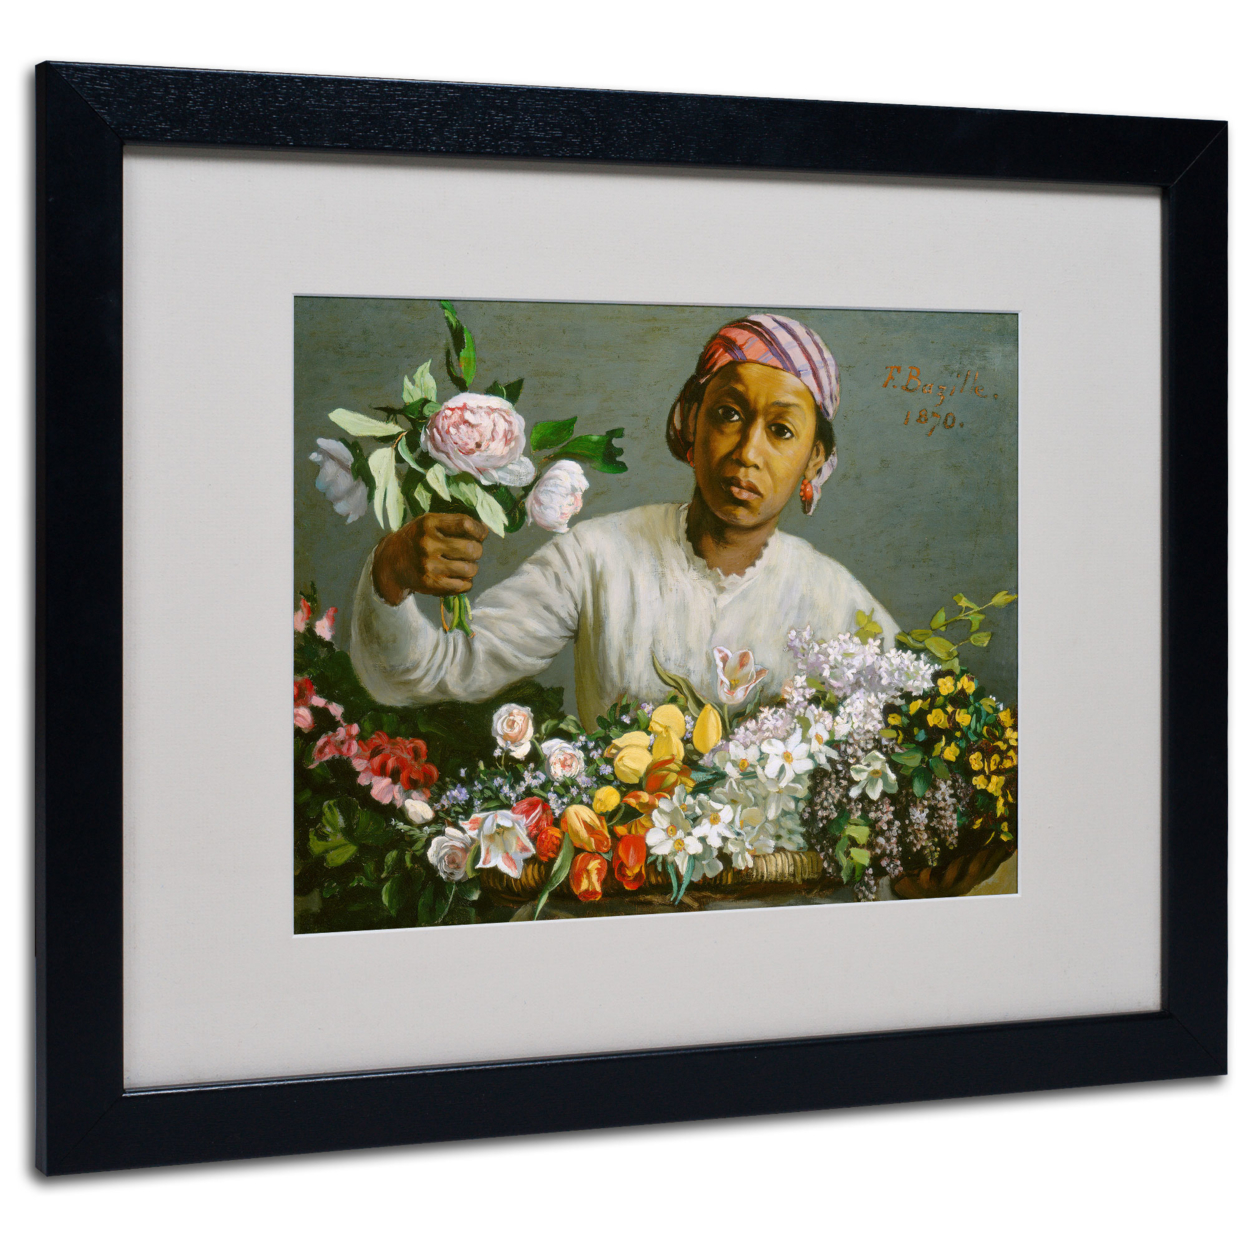 Jean Frederic Bazille 'Woman With Peonies' Black Wooden Framed Art 18 X 22 Inches